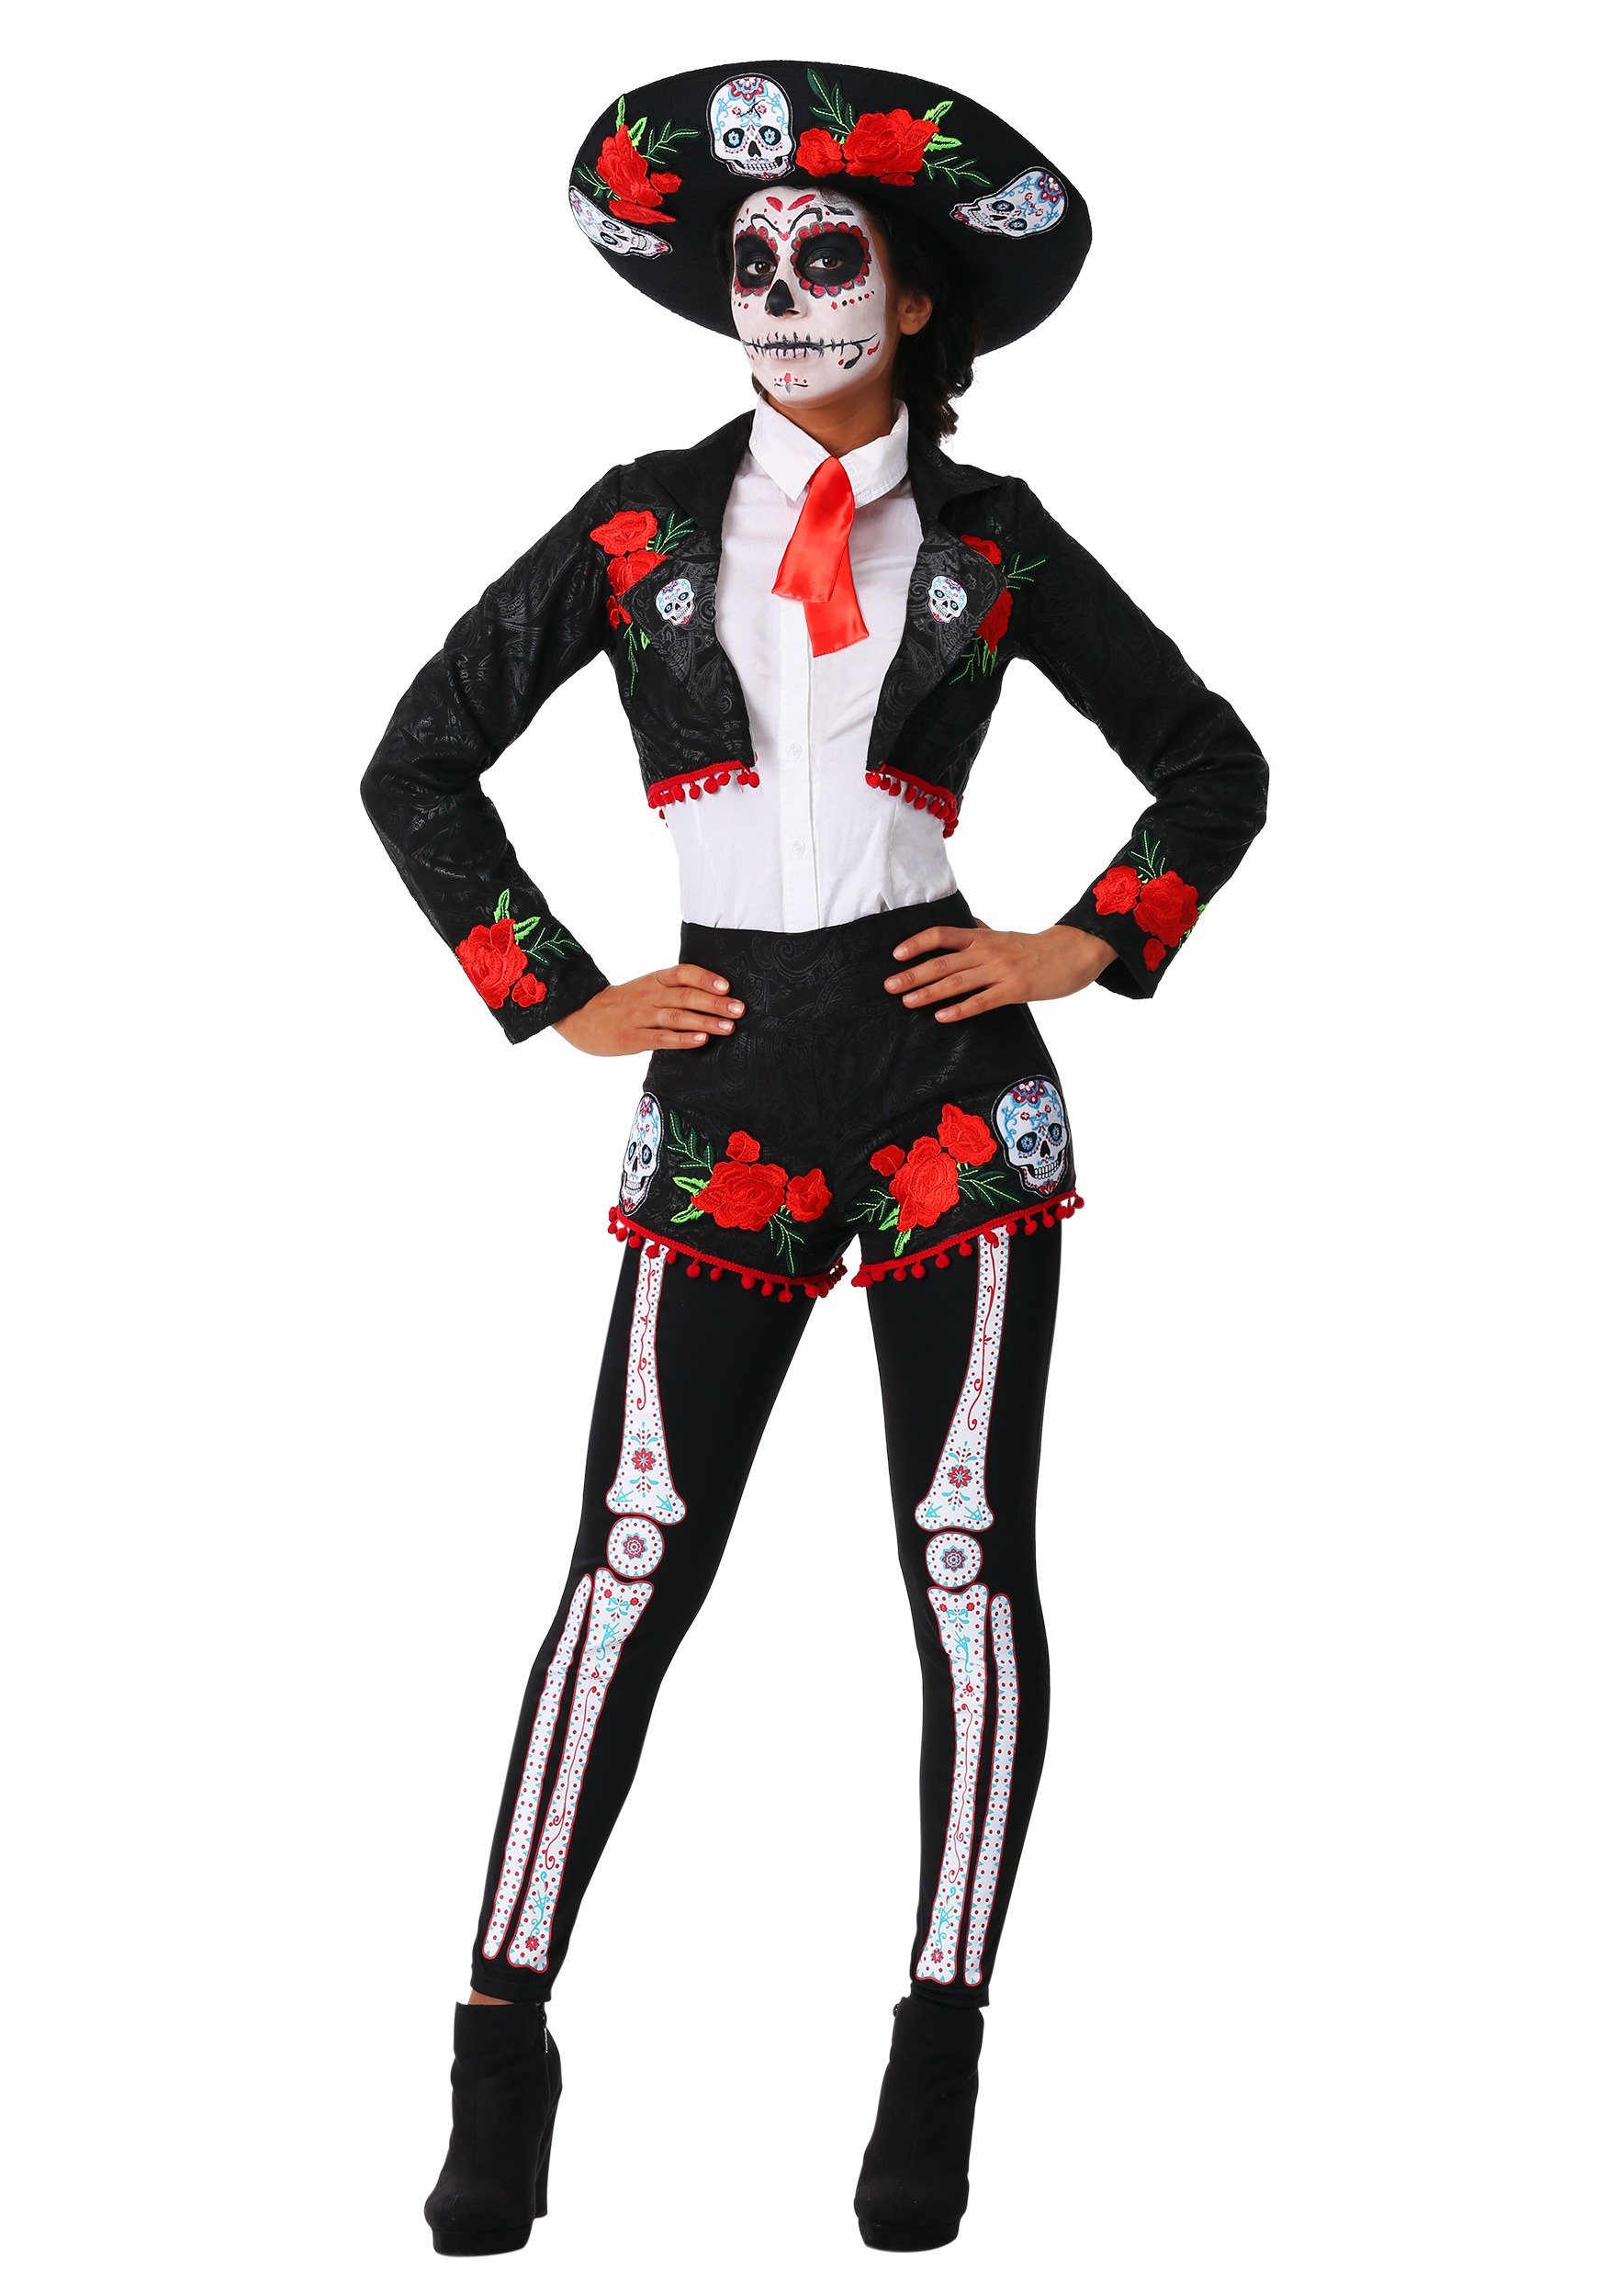 Photos - Fancy Dress FUN Costumes Day of the Dead Mariachi Women's Costume Black/Red/Wh